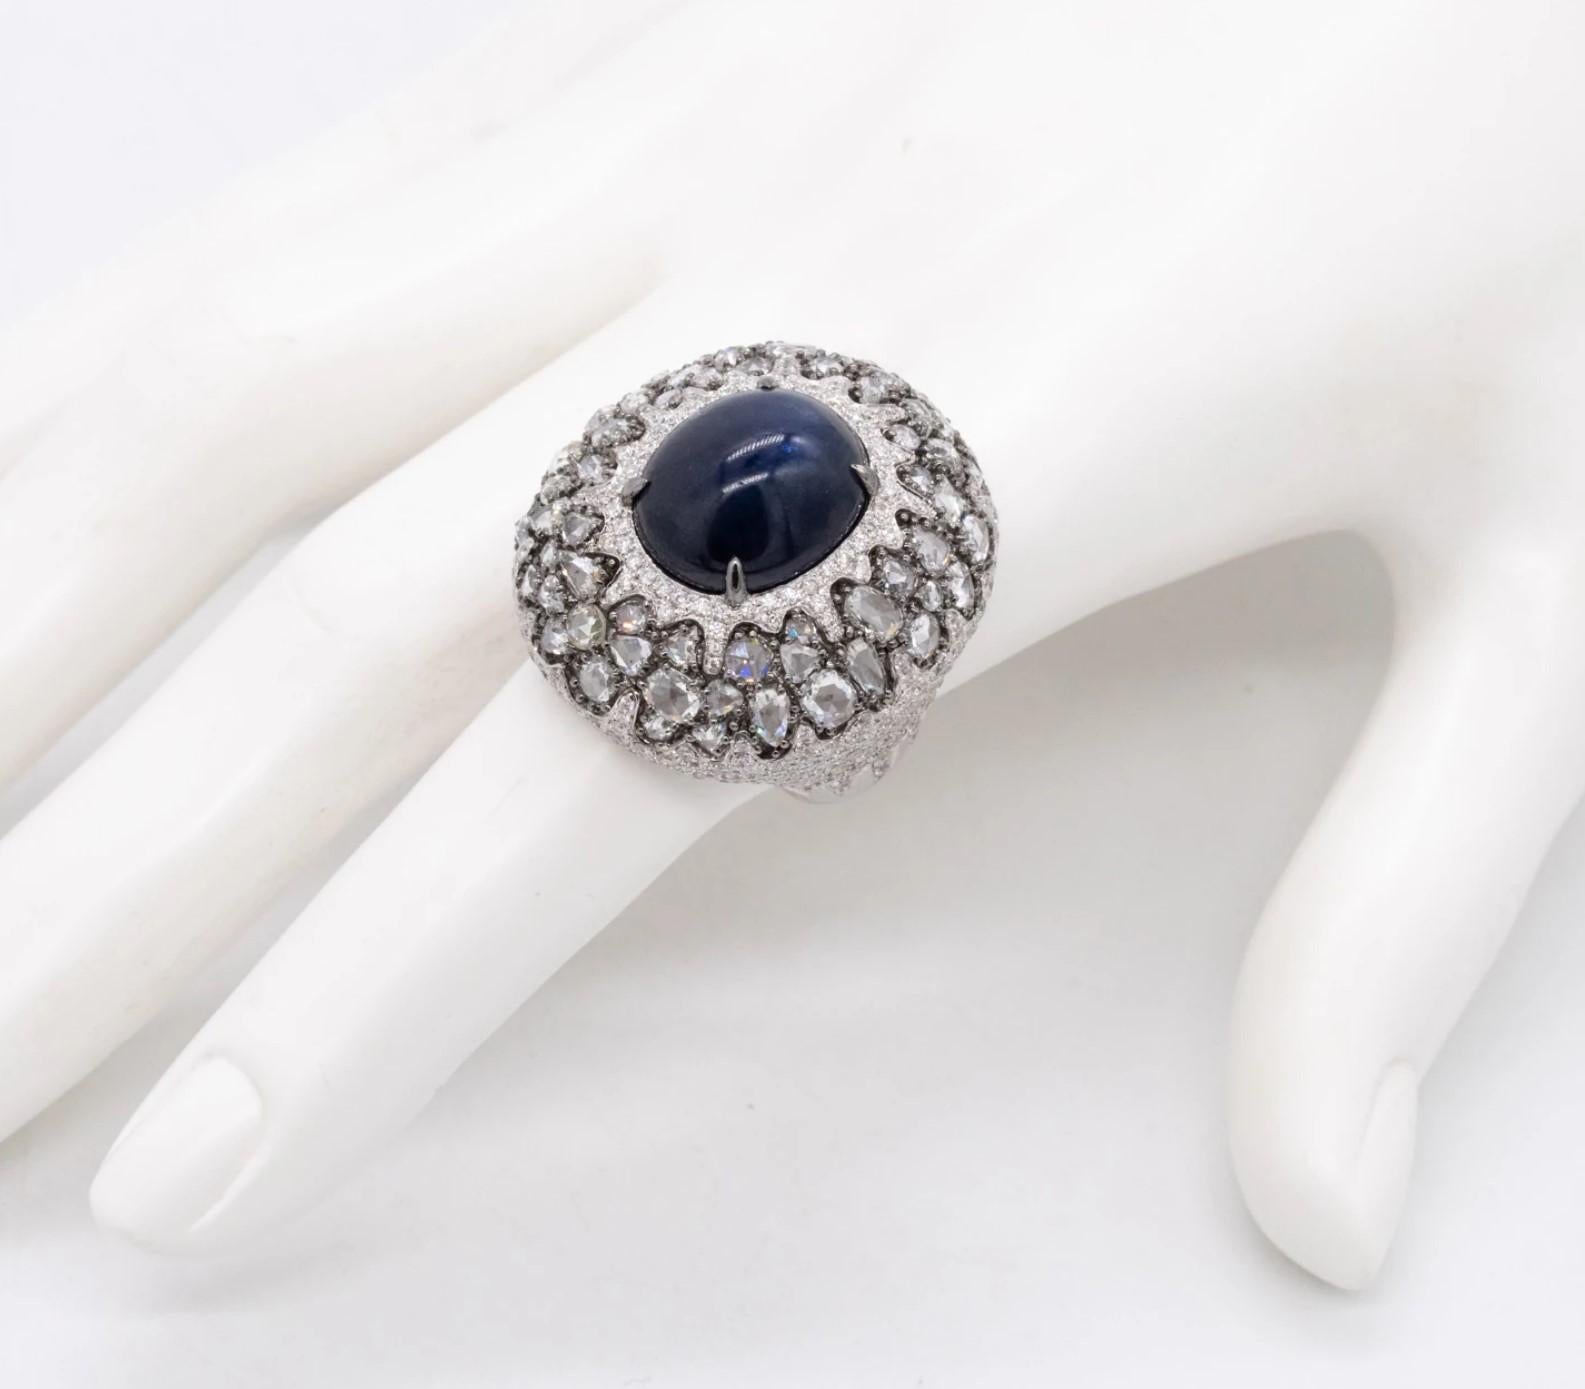 Women's Mouawad Rare Cocktail Ring in 18kt with 23.56 Ctw in Diamonds and Sapphire